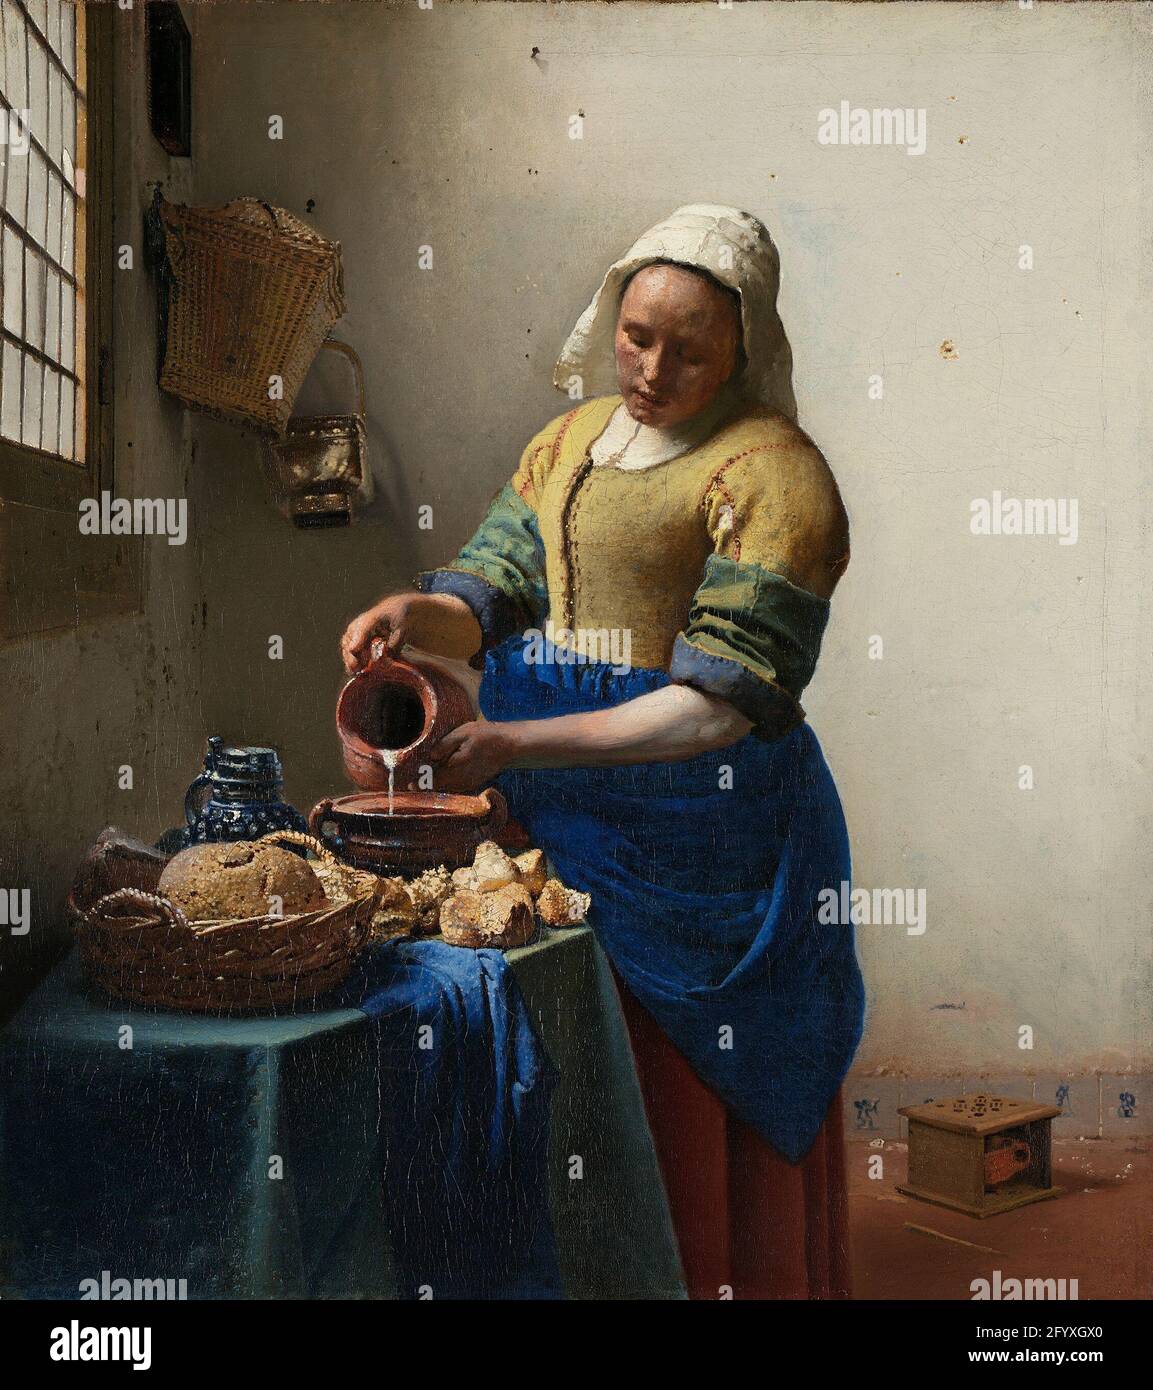 The Milkmaid. A maidservant pours milk, entirely absorbed in her work. Except for the stream of milk, everything else is still. Vermeer took this simple everyday activity and made it the subject of an impressive painting – the woman stands like a statue in the brightly lit room. Vermeer also had an eye for how light by means of hundreds of colourful dots plays over the surface of objects. Stock Photo